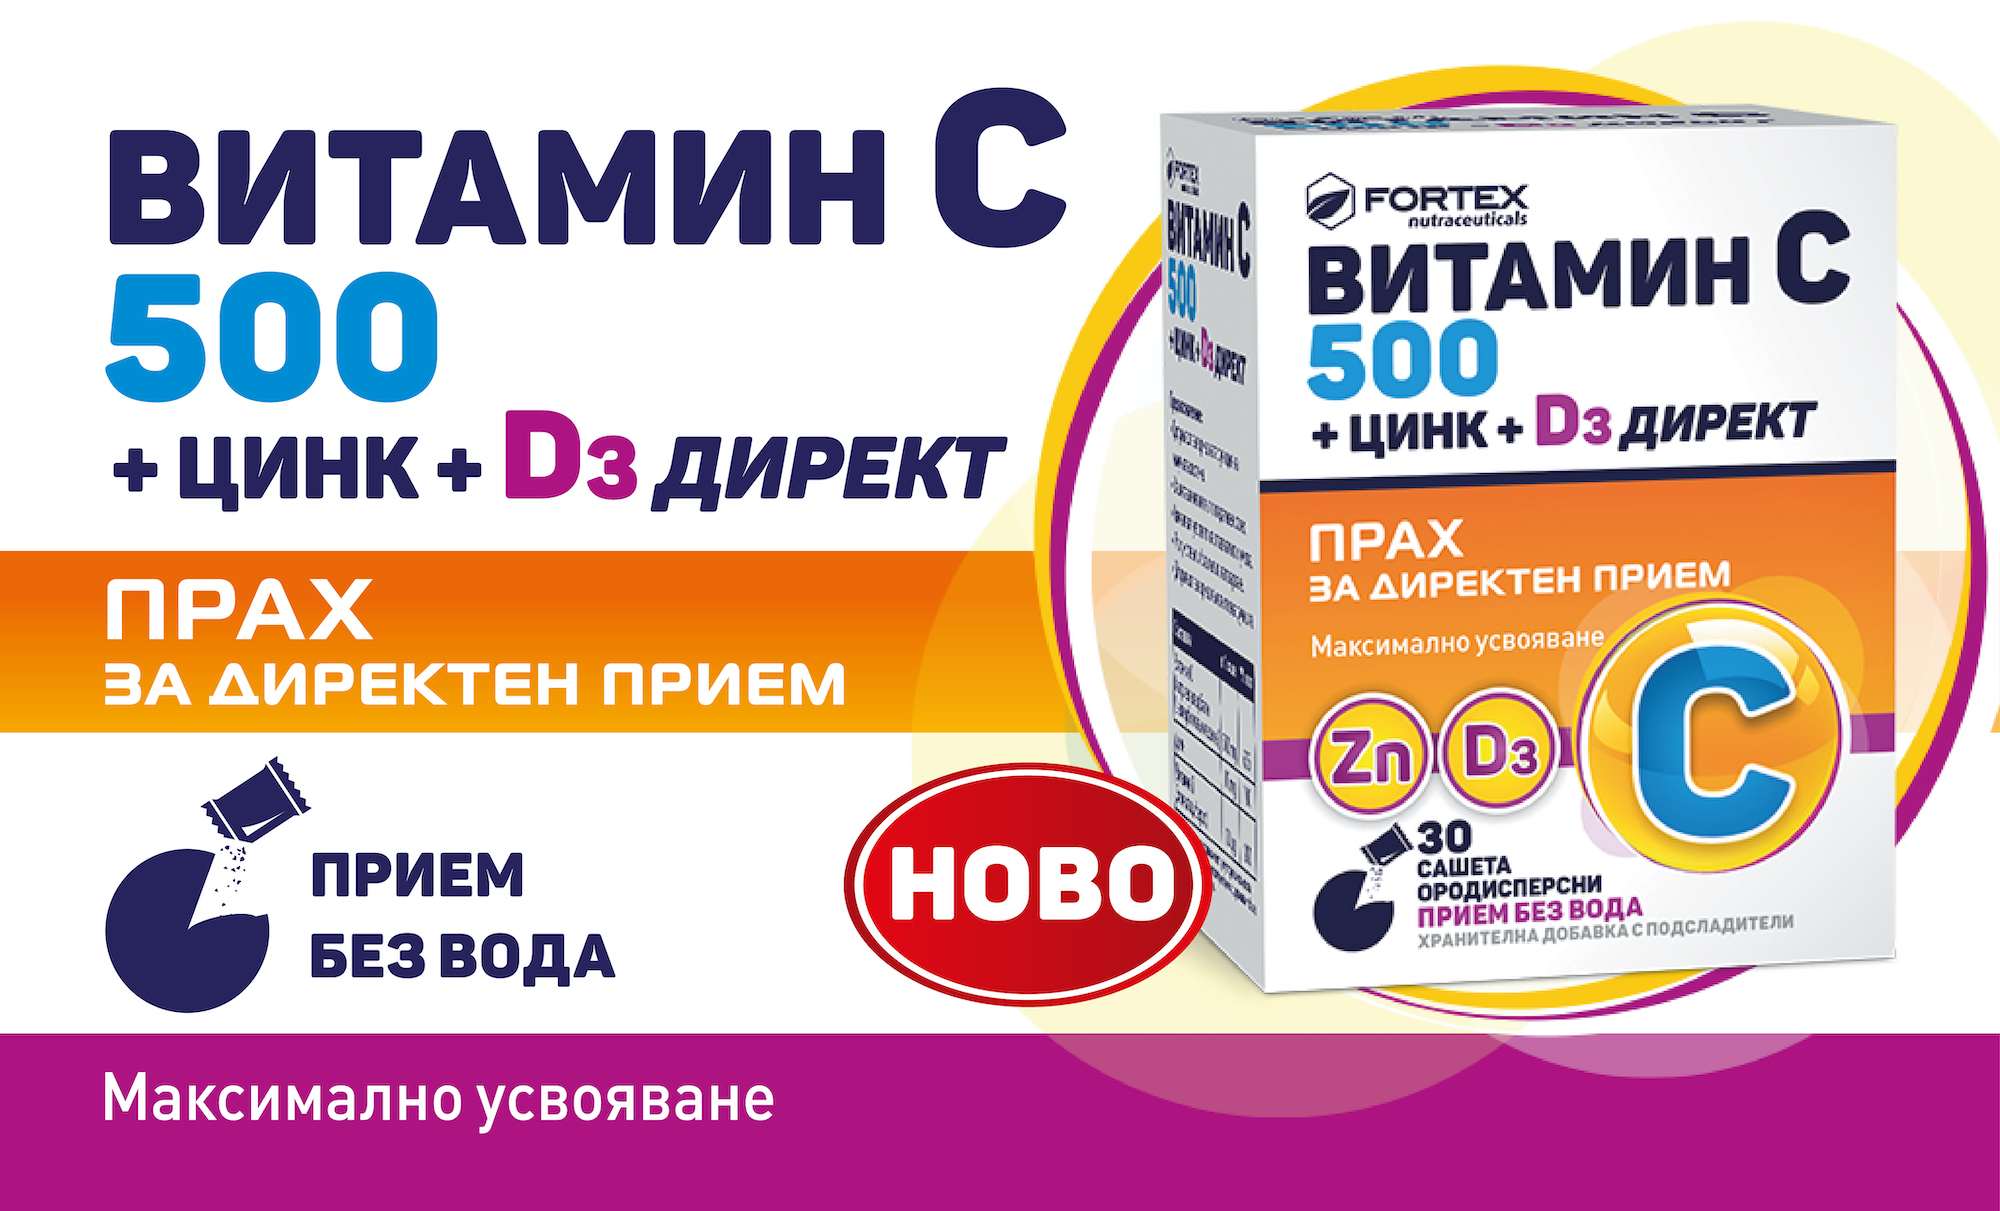 Vitamin C 500 + Zinc + D3 Direct with 30 sachets in Pack ...